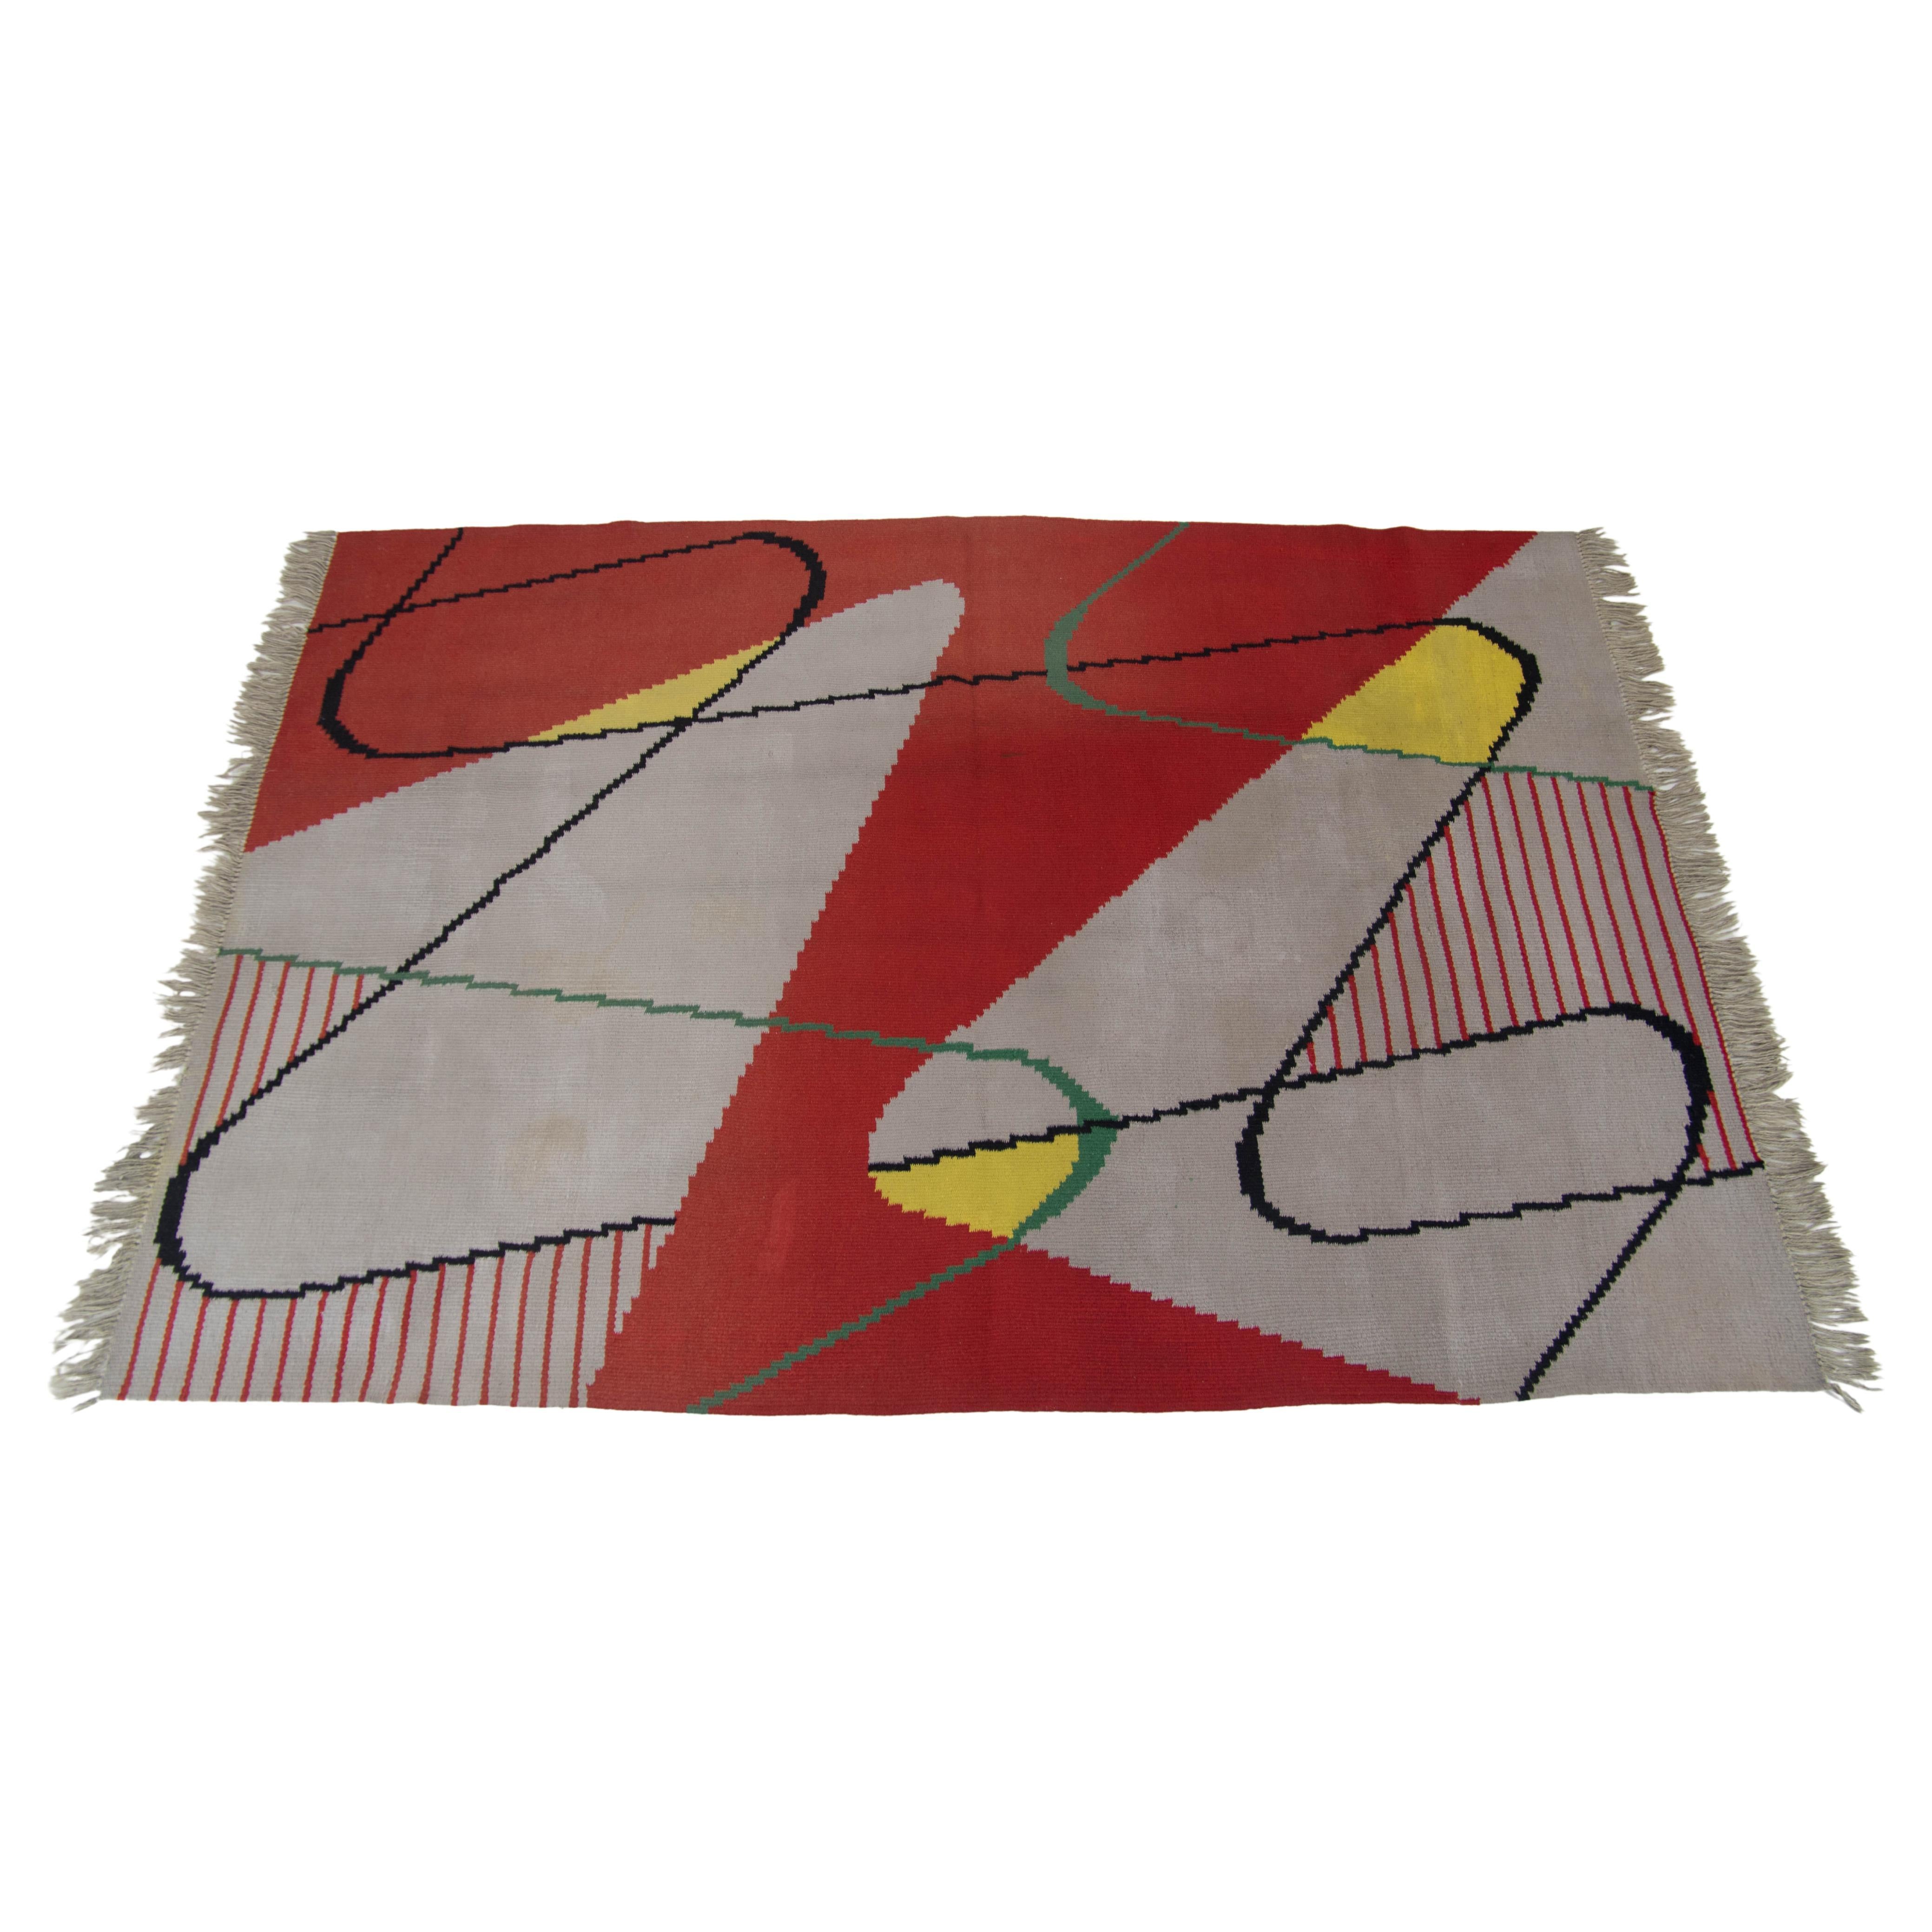 Abstract Wool Carpet, Czechoslovakia, 1950s For Sale